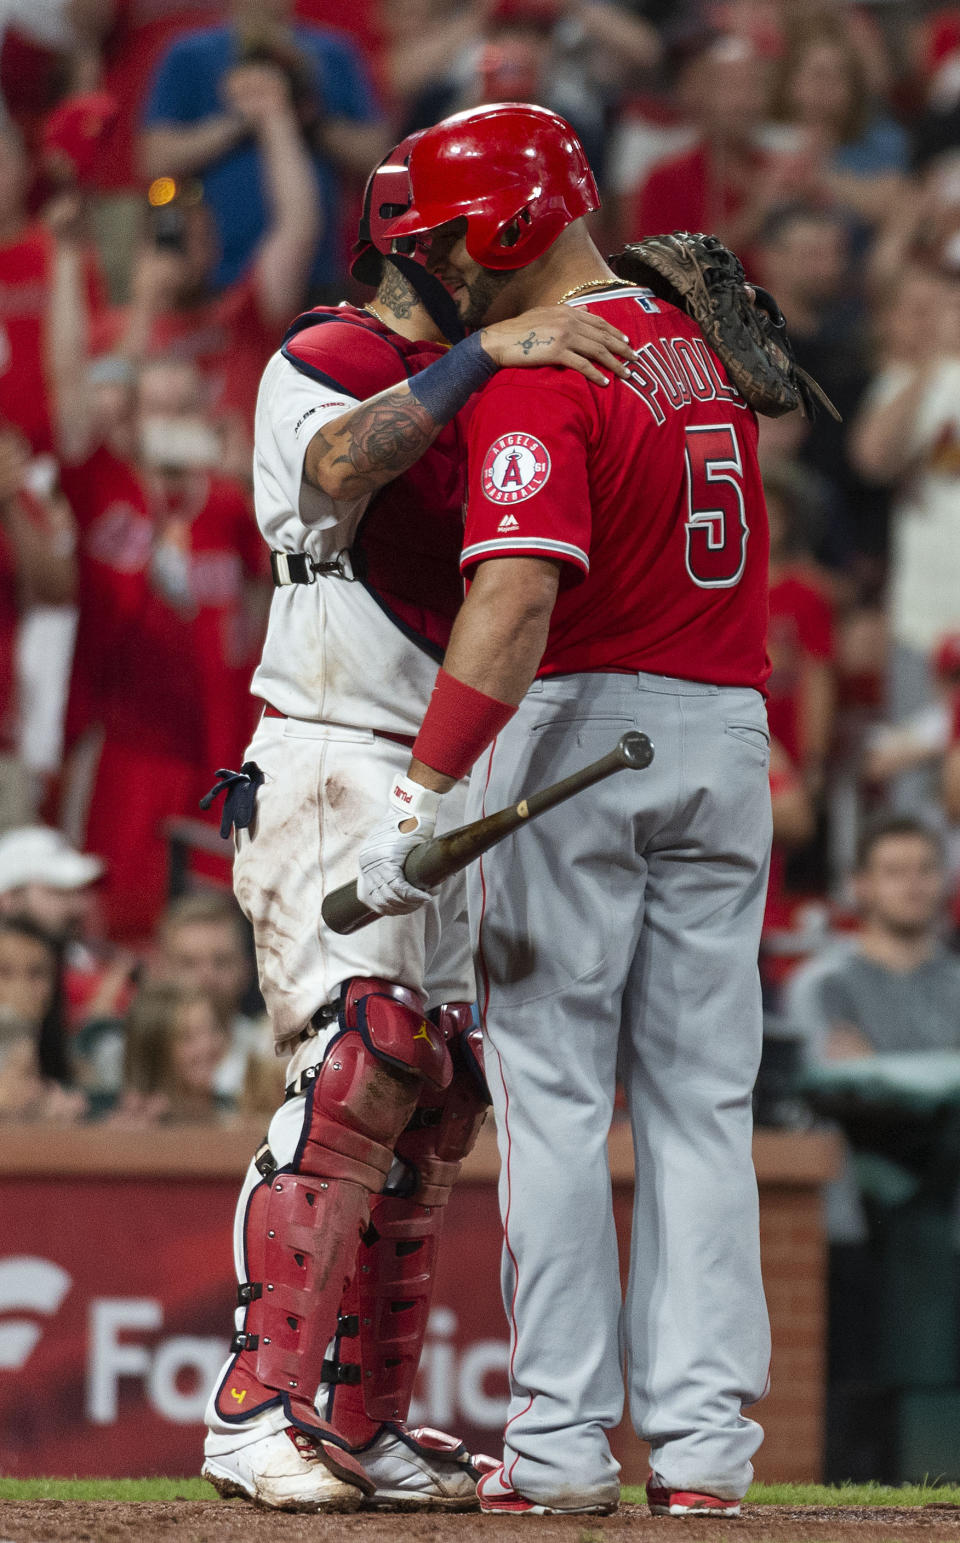 St. Louis Cardinals catcher Yadier Molina, left, hugs his former teammate Los Angeles Angels' Albert Pujols, right, after Pujols' last at bat of the night during the ninth inning of a baseball game, Sunday, June 23, 2019, in St. Louis. (AP Photo/L.G. Patterson)